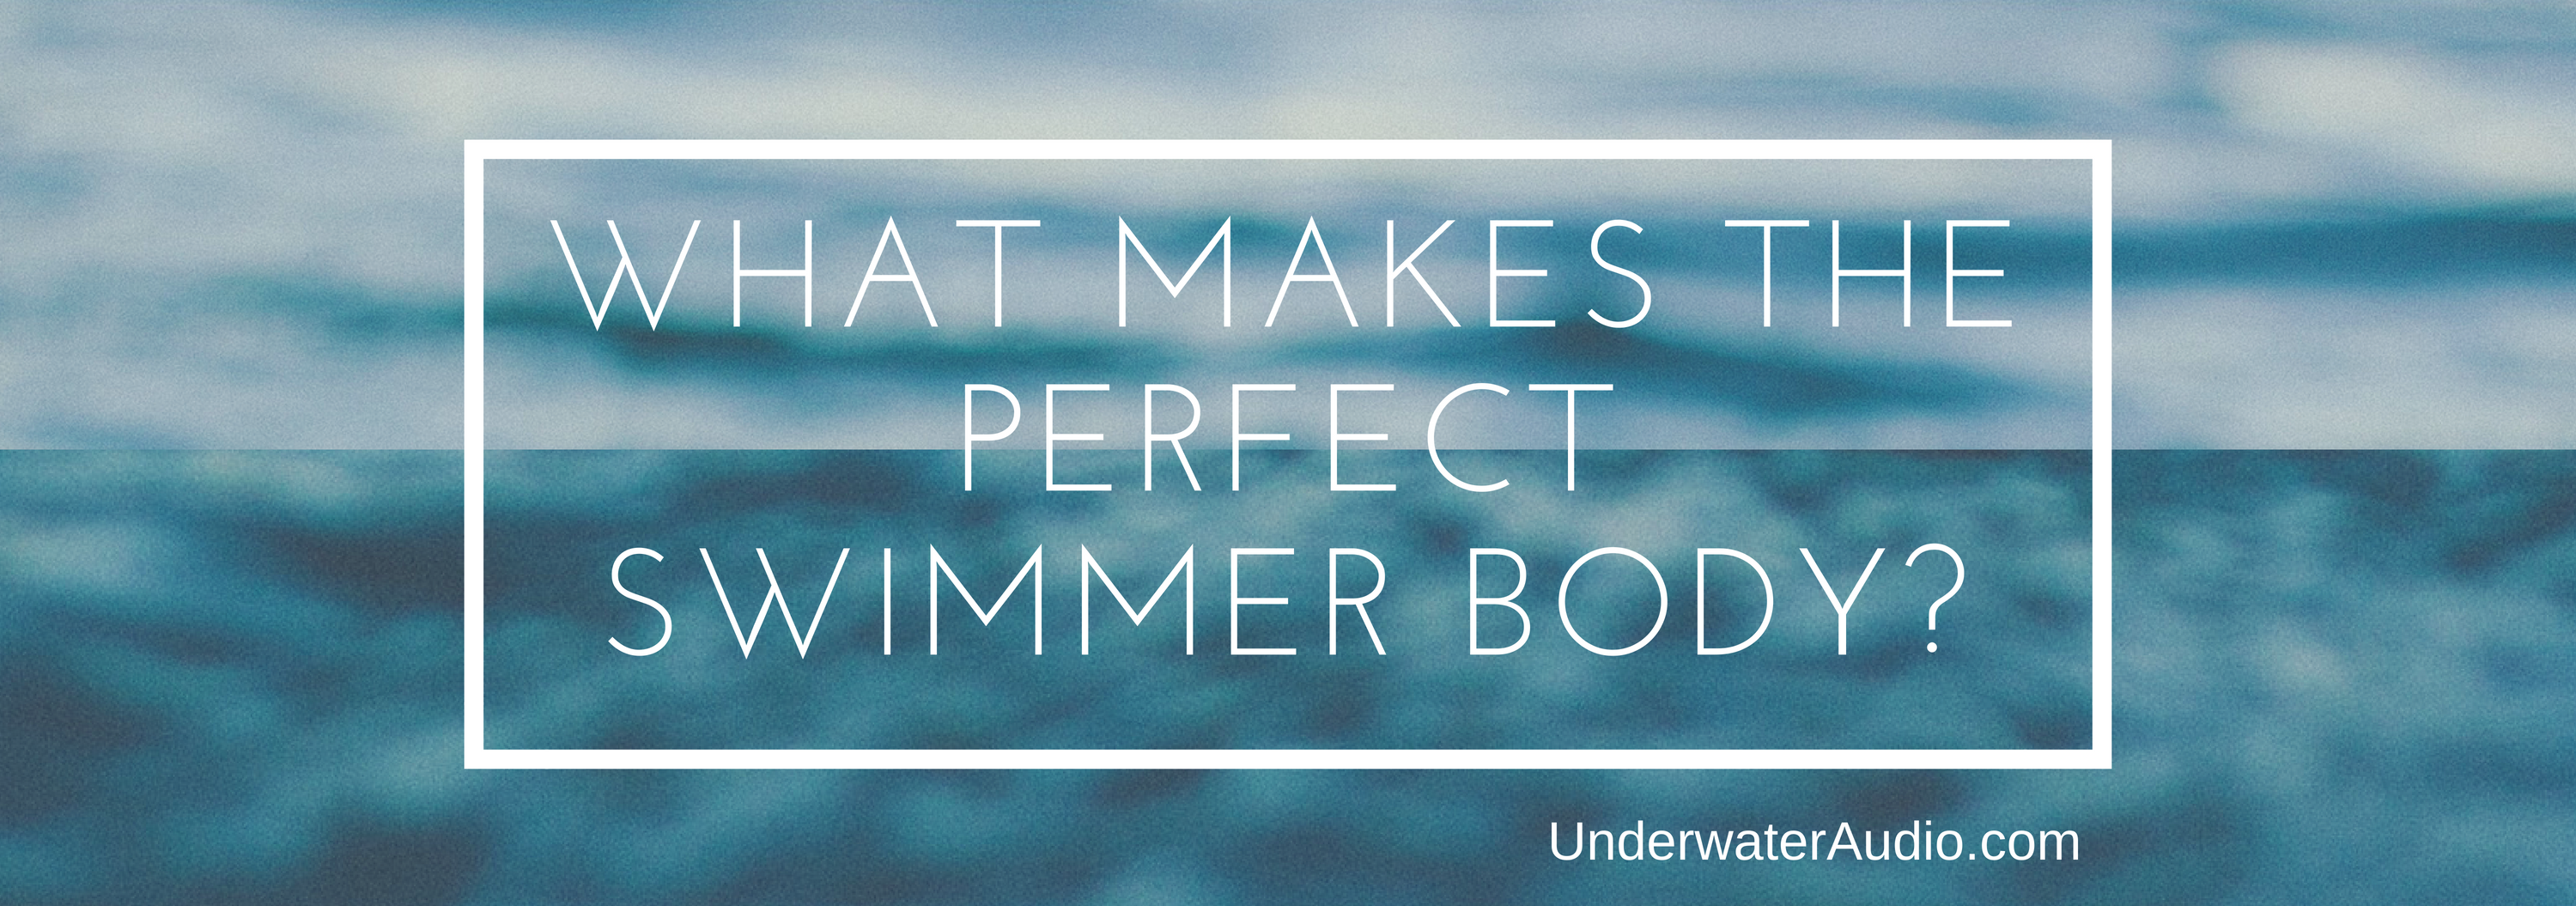 What Makes the Perfect Swimmer Body?